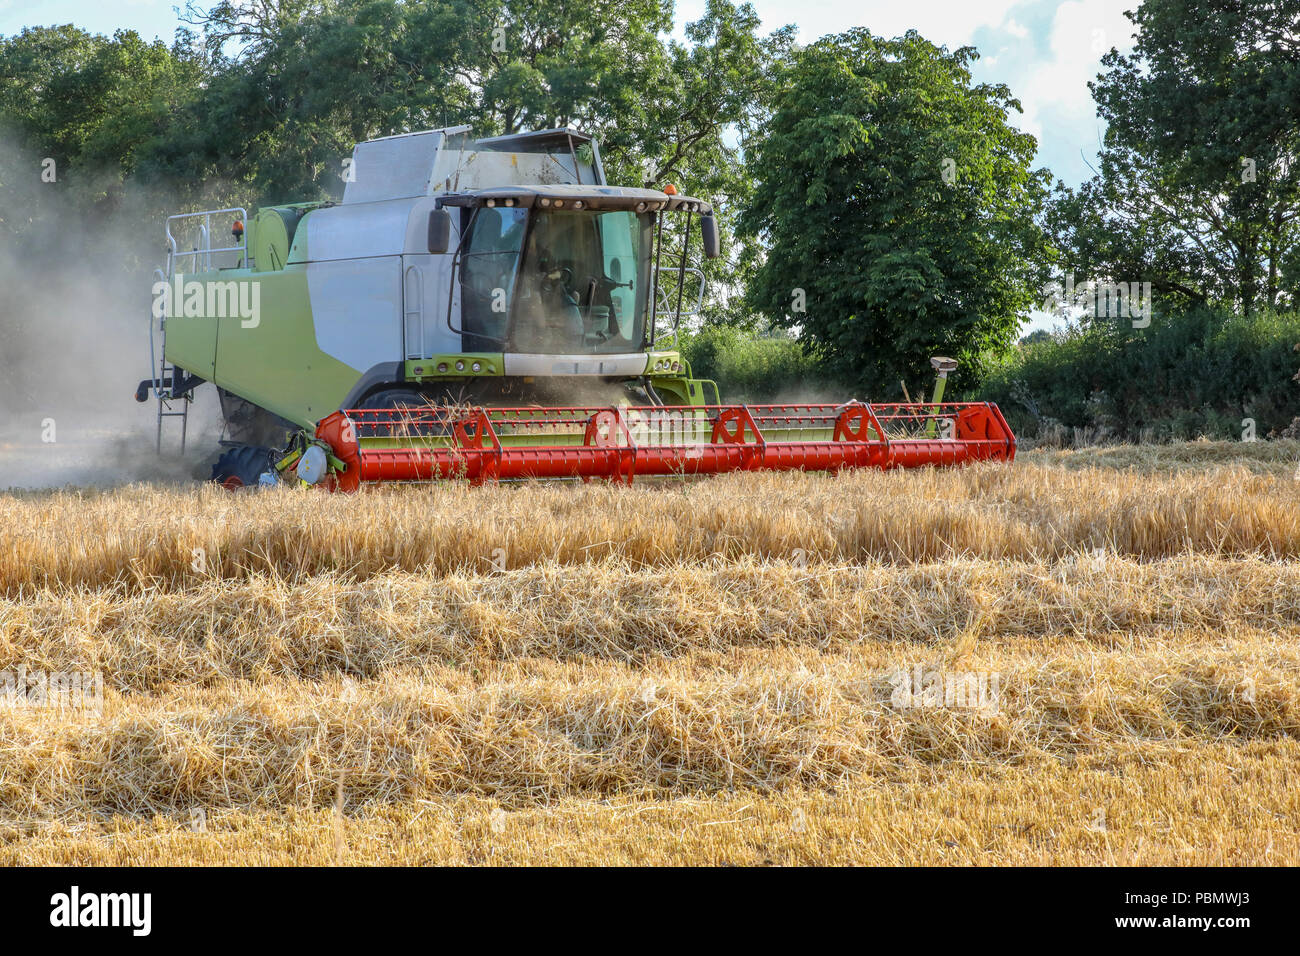 RH 45 degree angle across reel and cutting gear raised as combine harvester the a corner in a field of barley Stock Photo